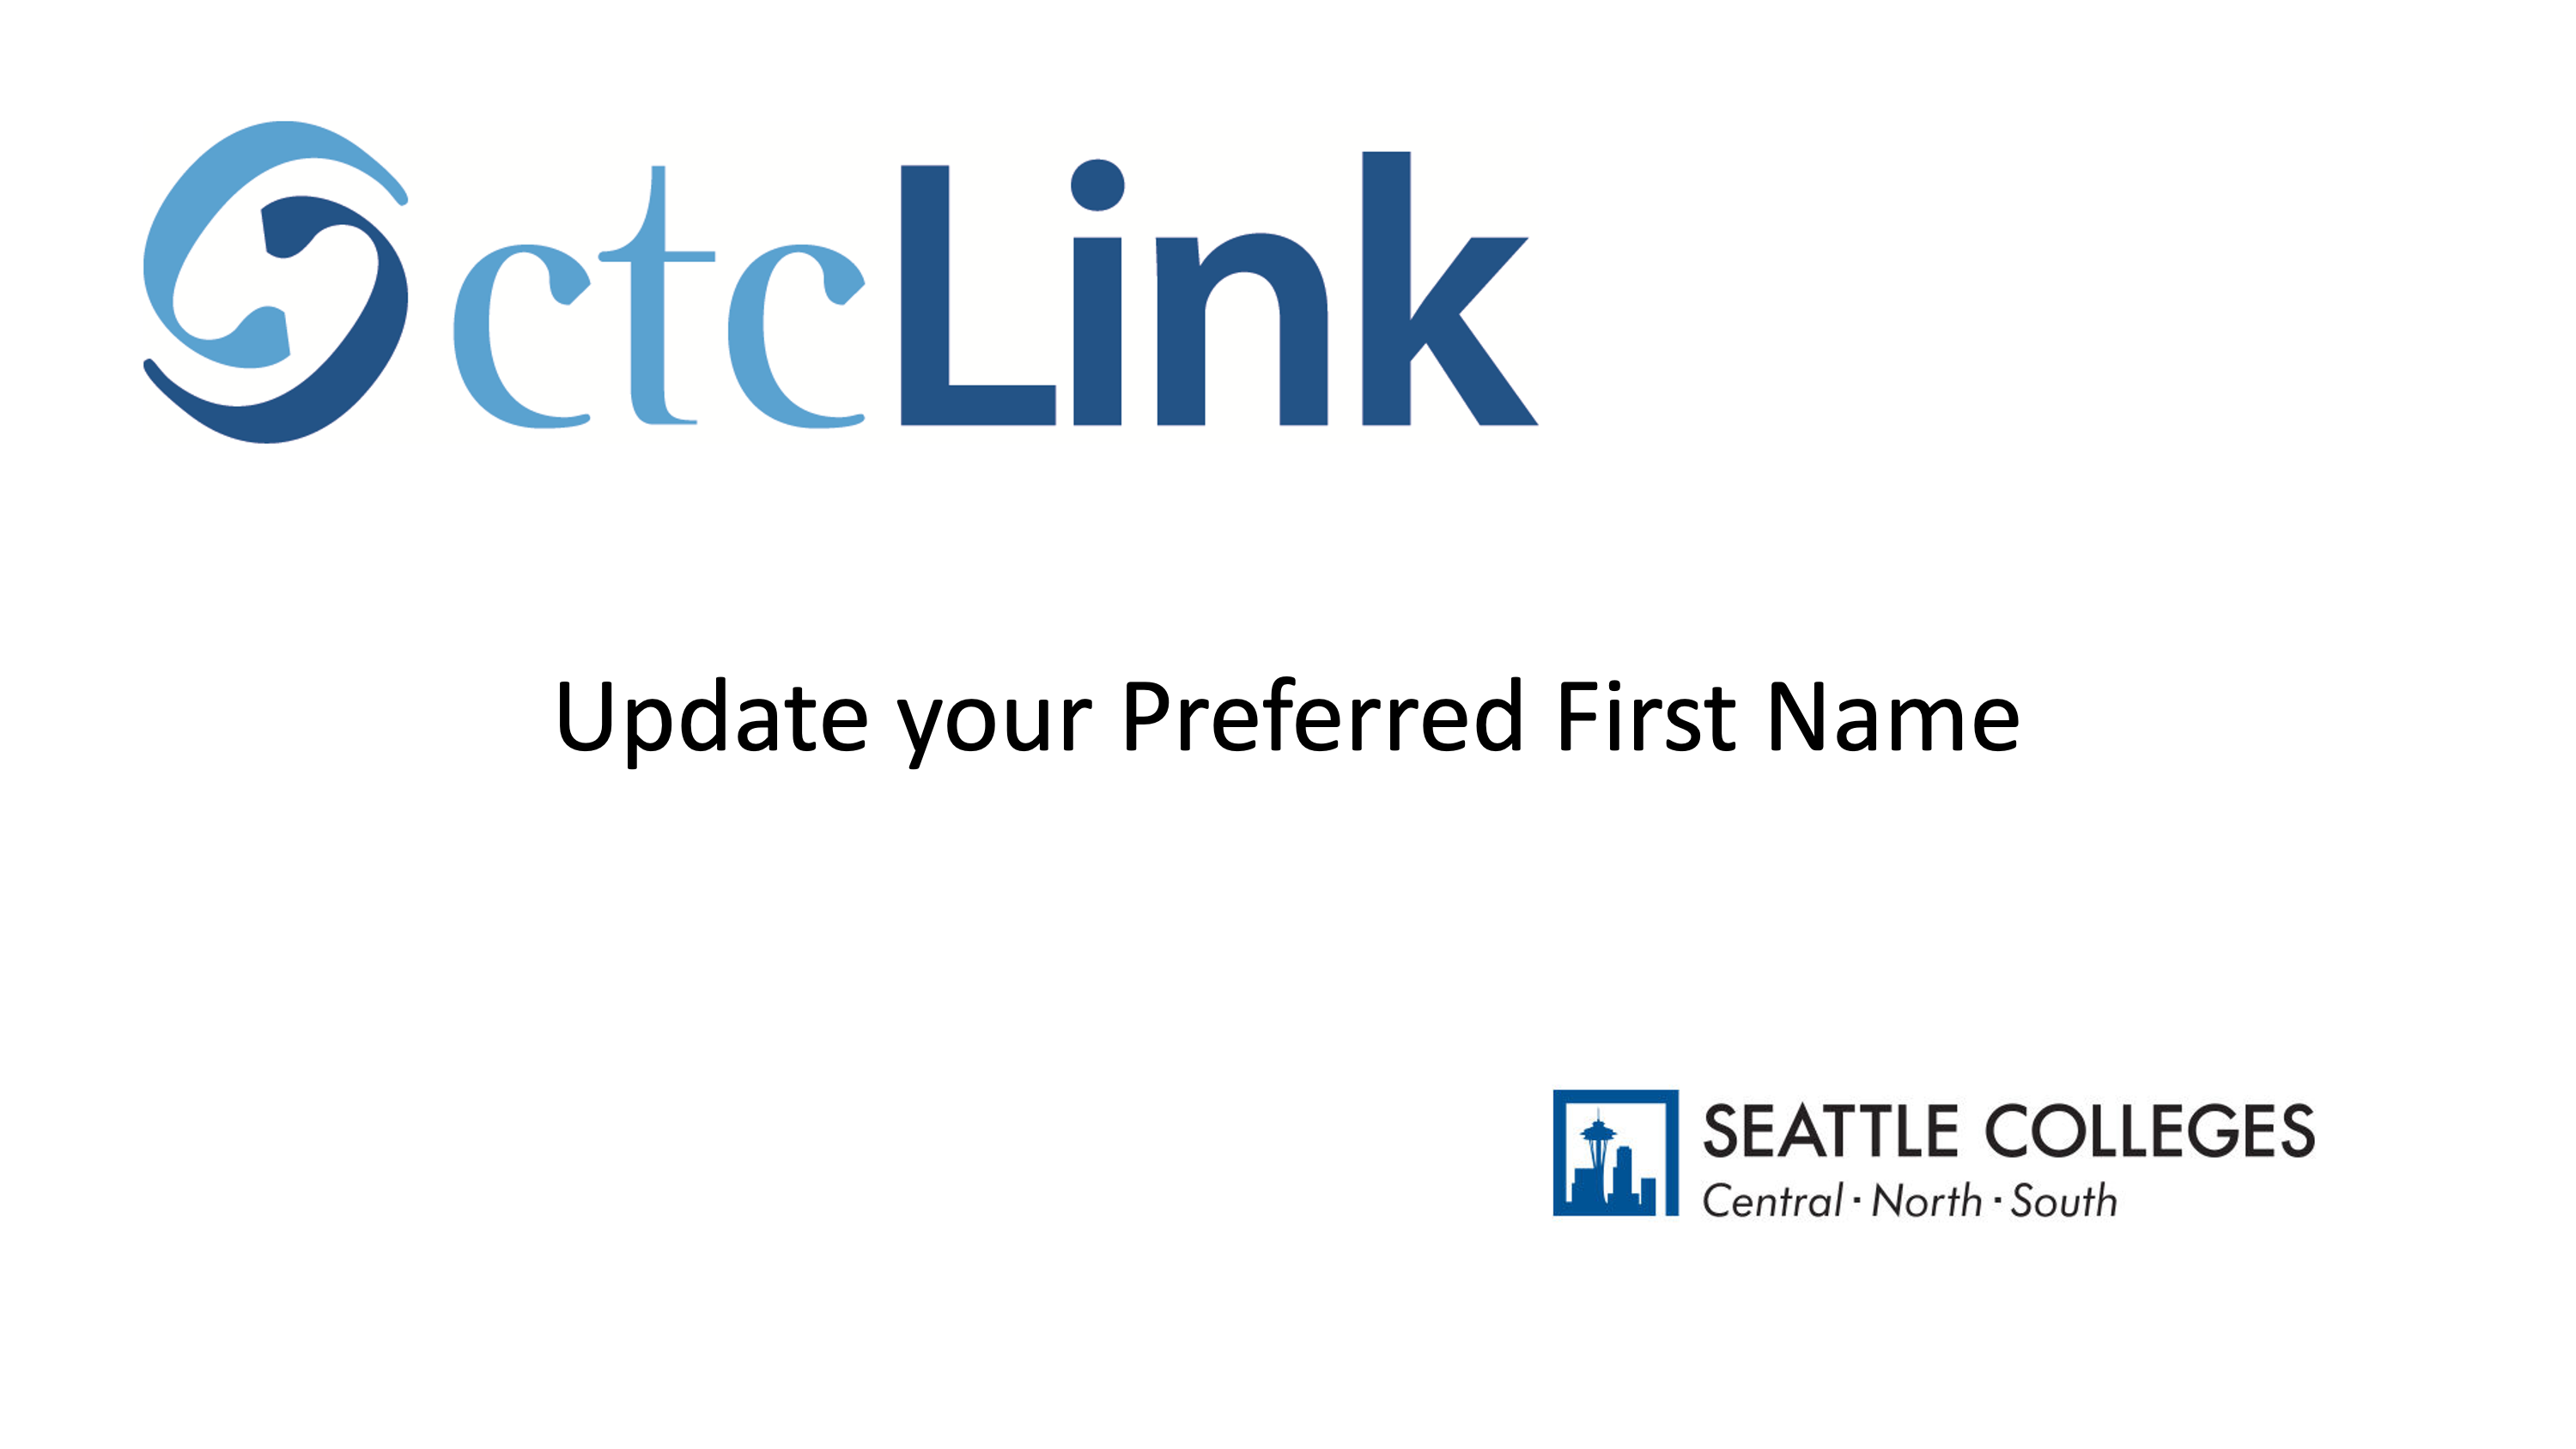 Update your preferred first name